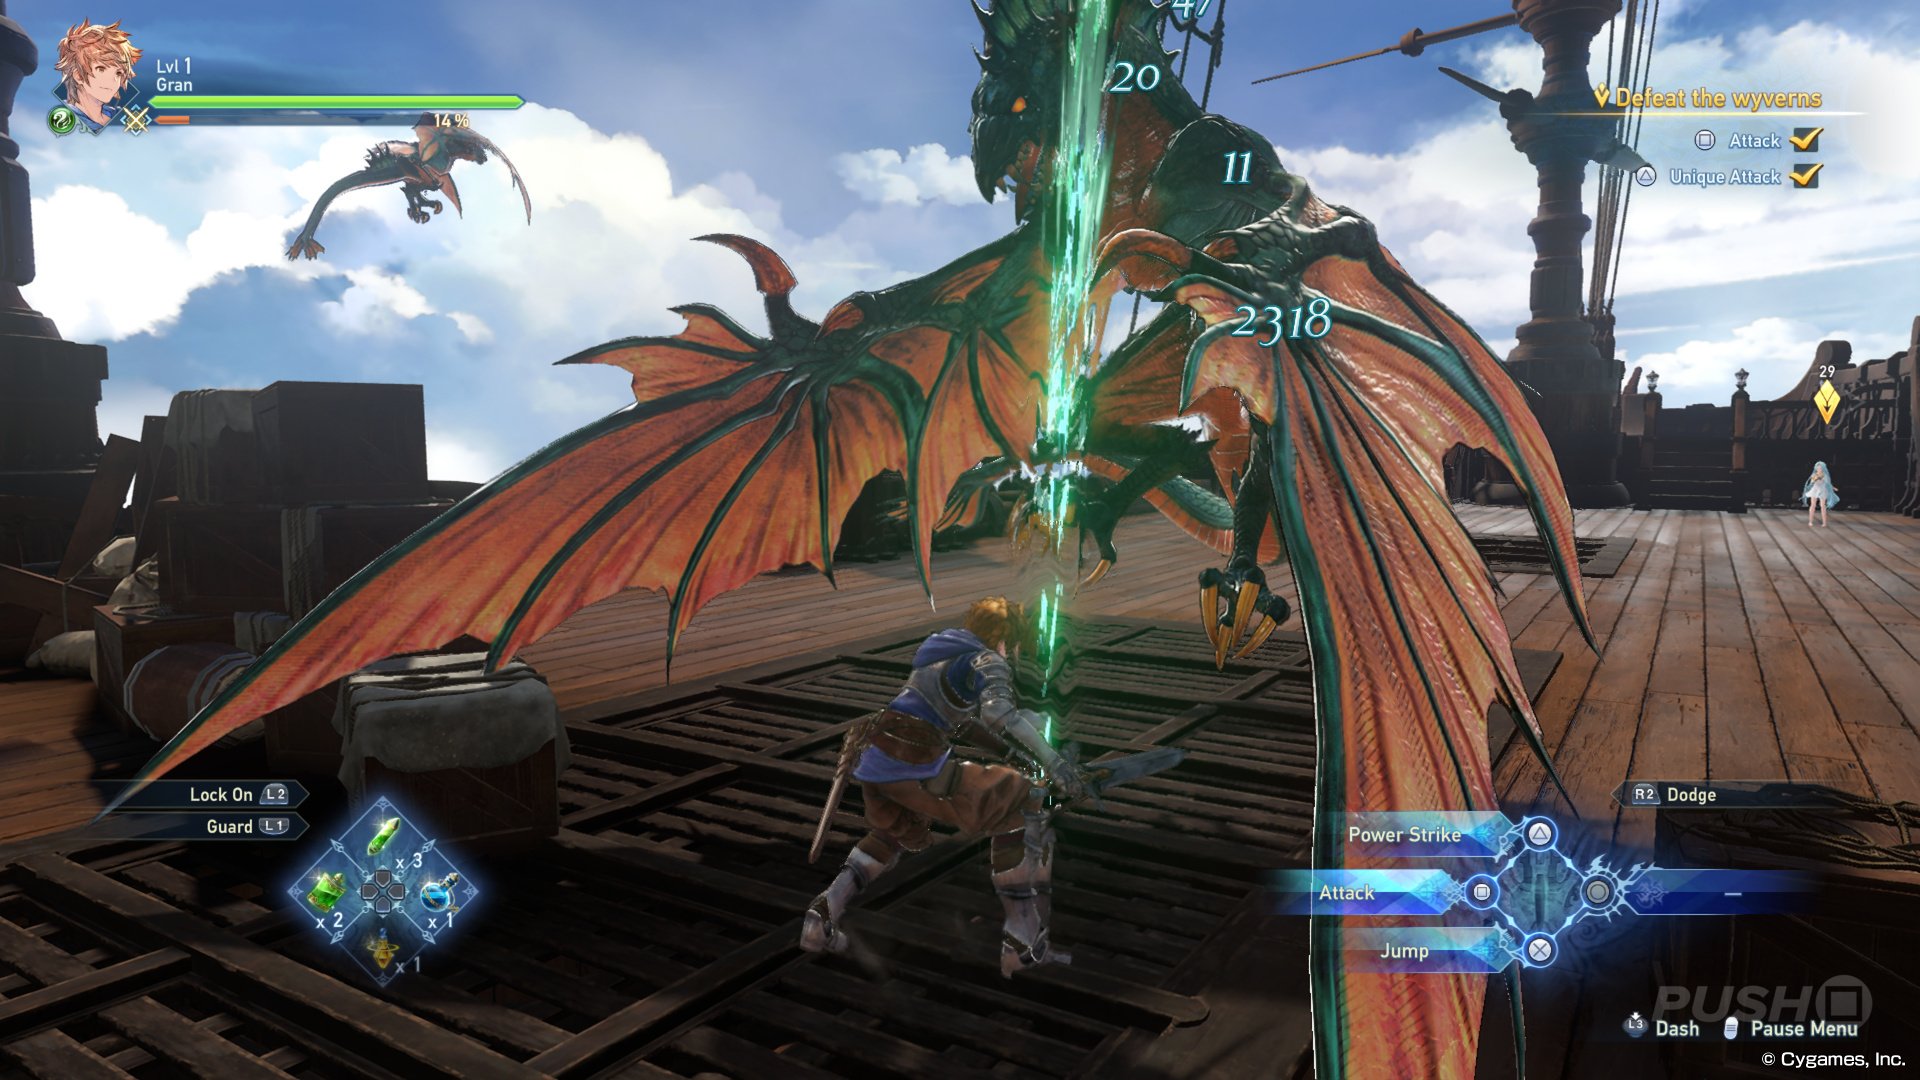 Granblue Fantasy: Relink Review - Definitely Worth The Wait